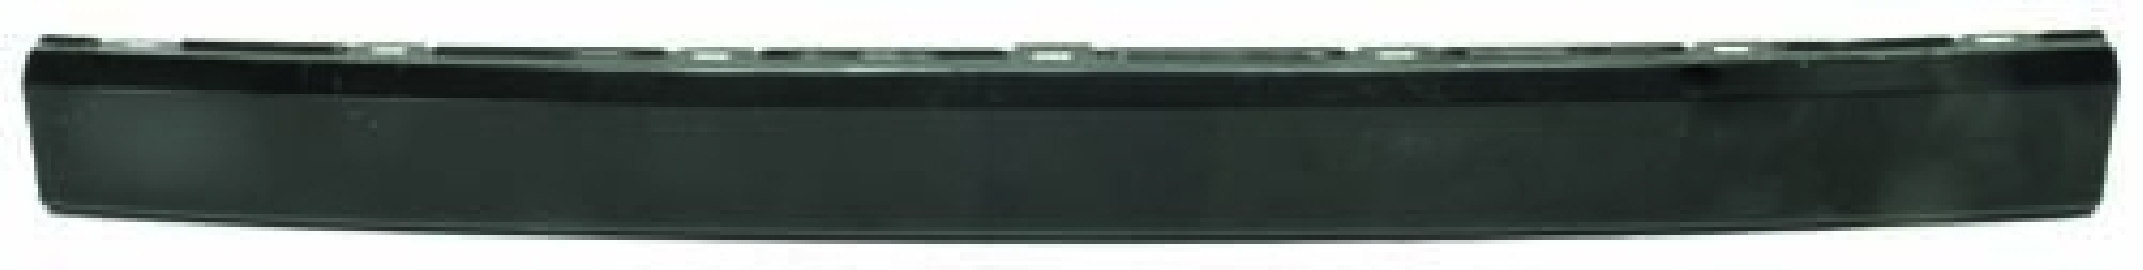 Lower Front Grille Panel, Short Nose, T4 09/90-08/94